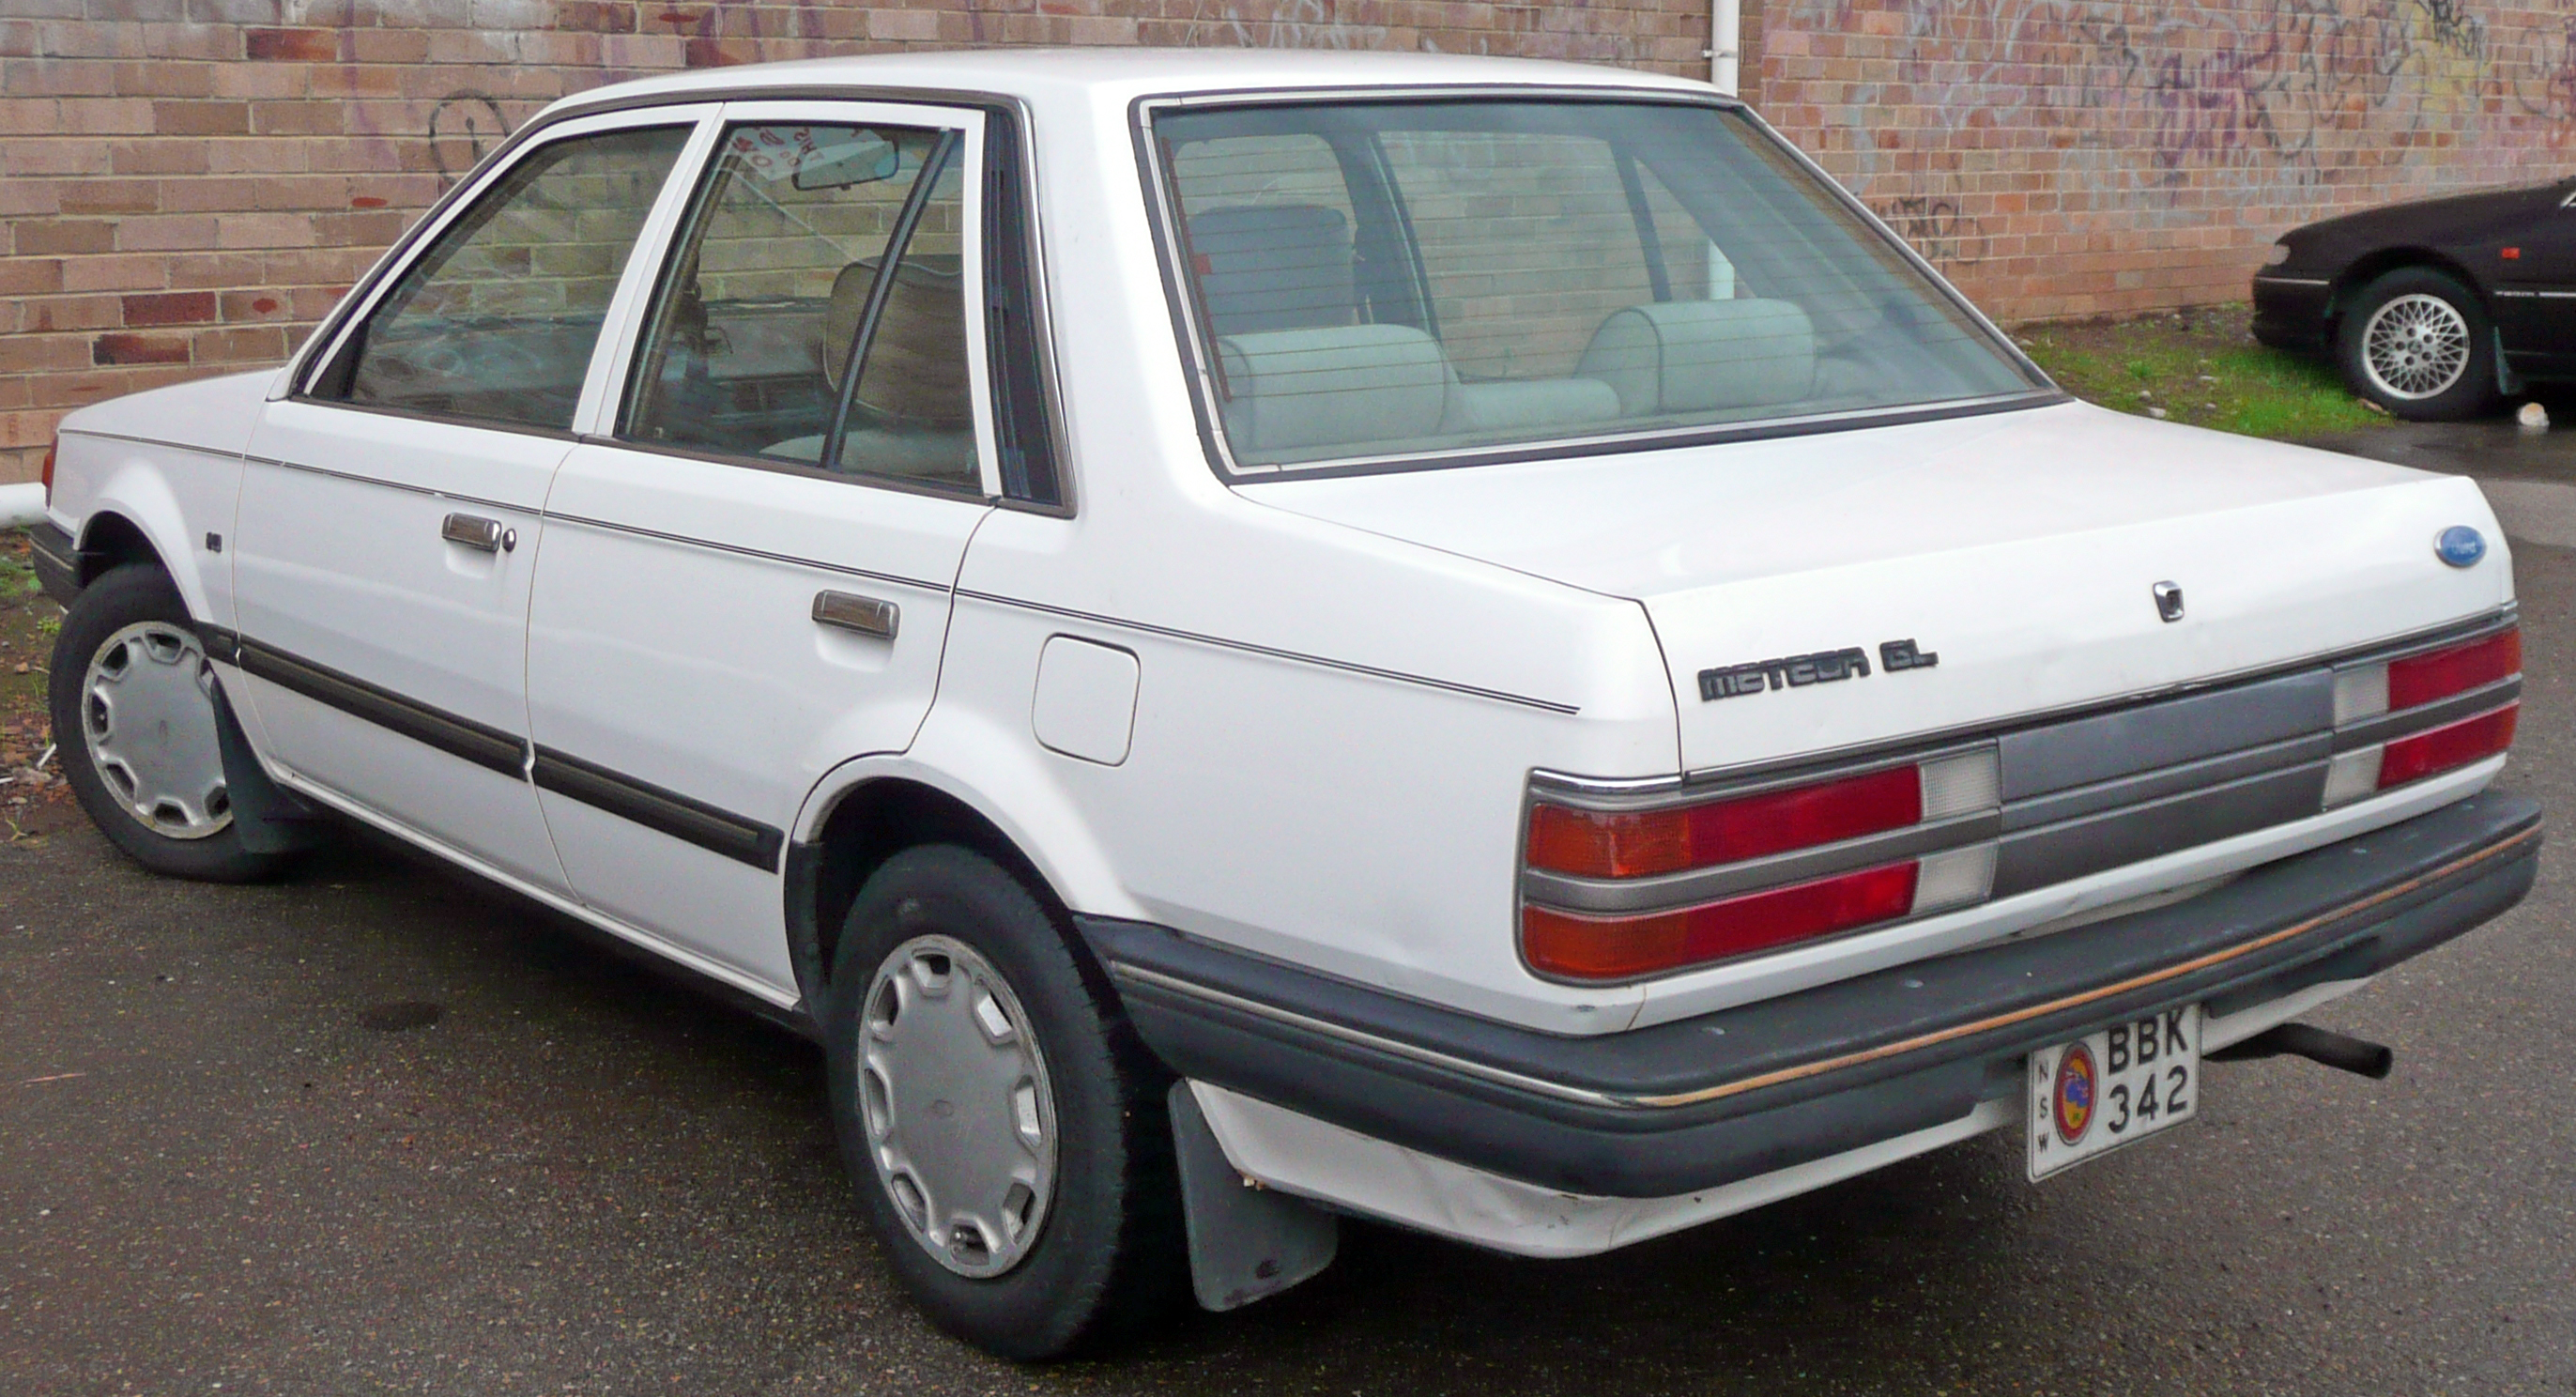 Ford meteor 1987 manual